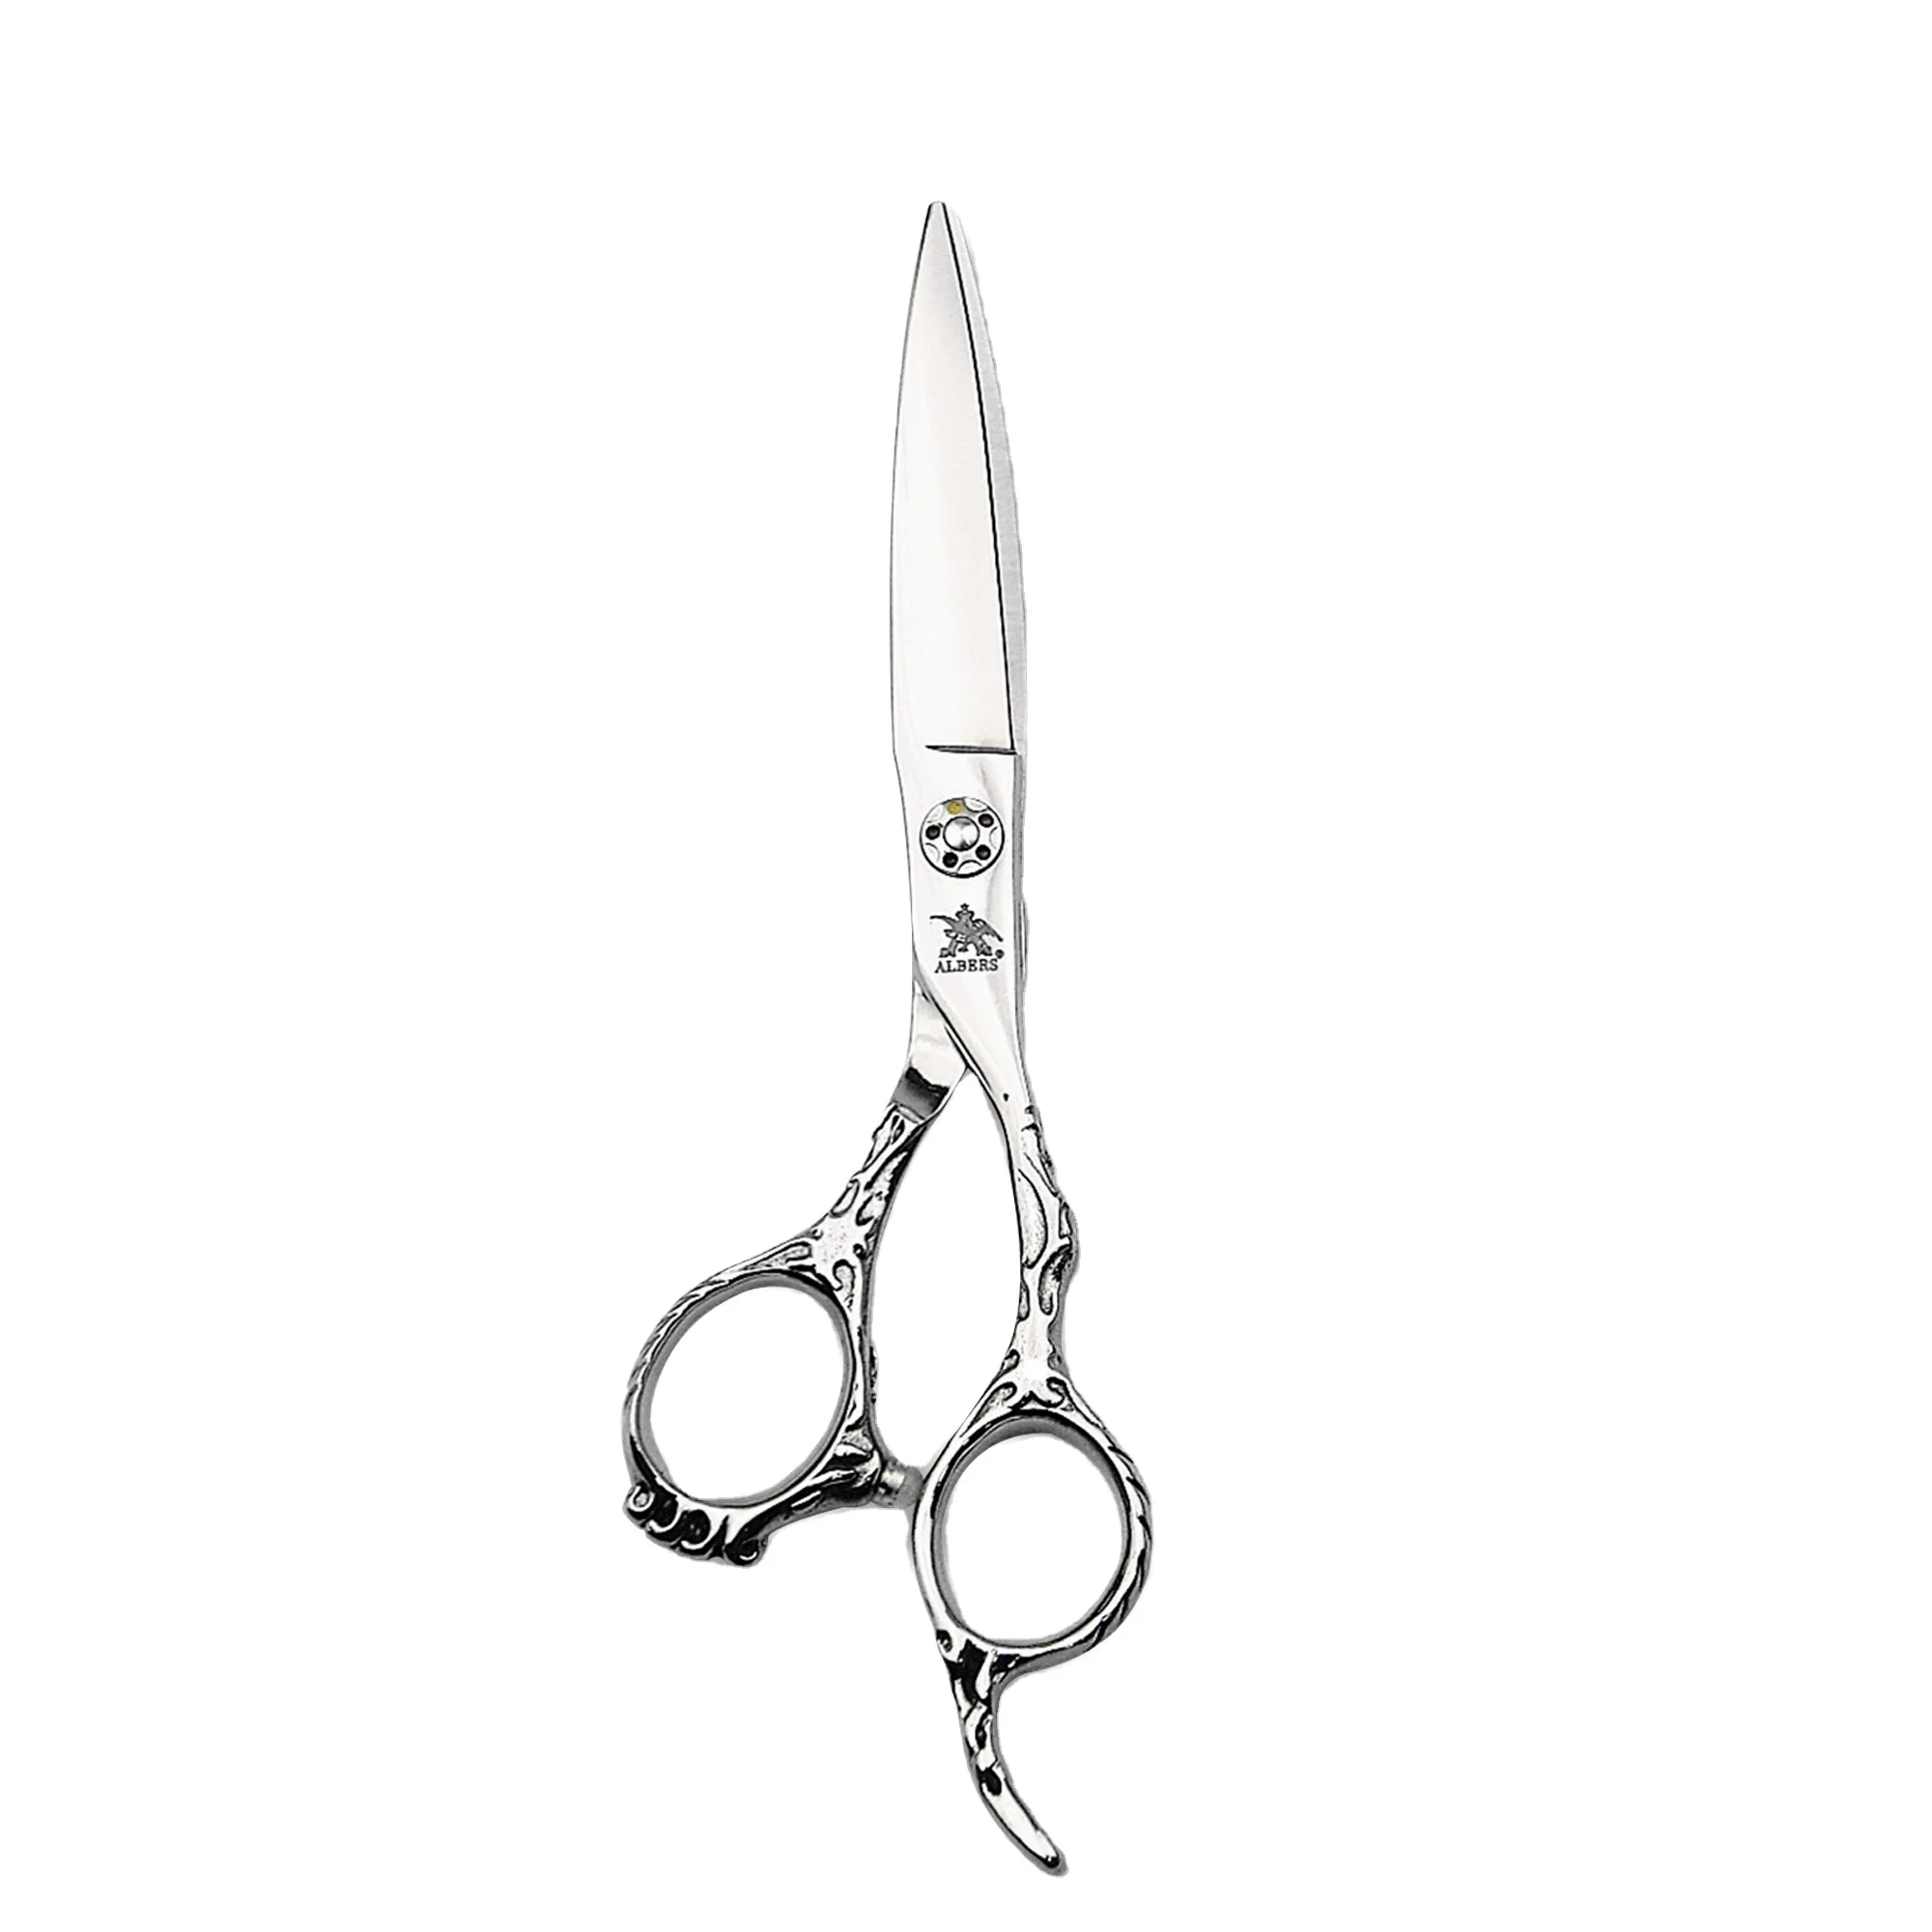 

[HOT Sale] Fashionable Hair Scissors 440c Japan steel barber cut and hair thinning scissor for beauty care and salon, Silver or other color you wanted